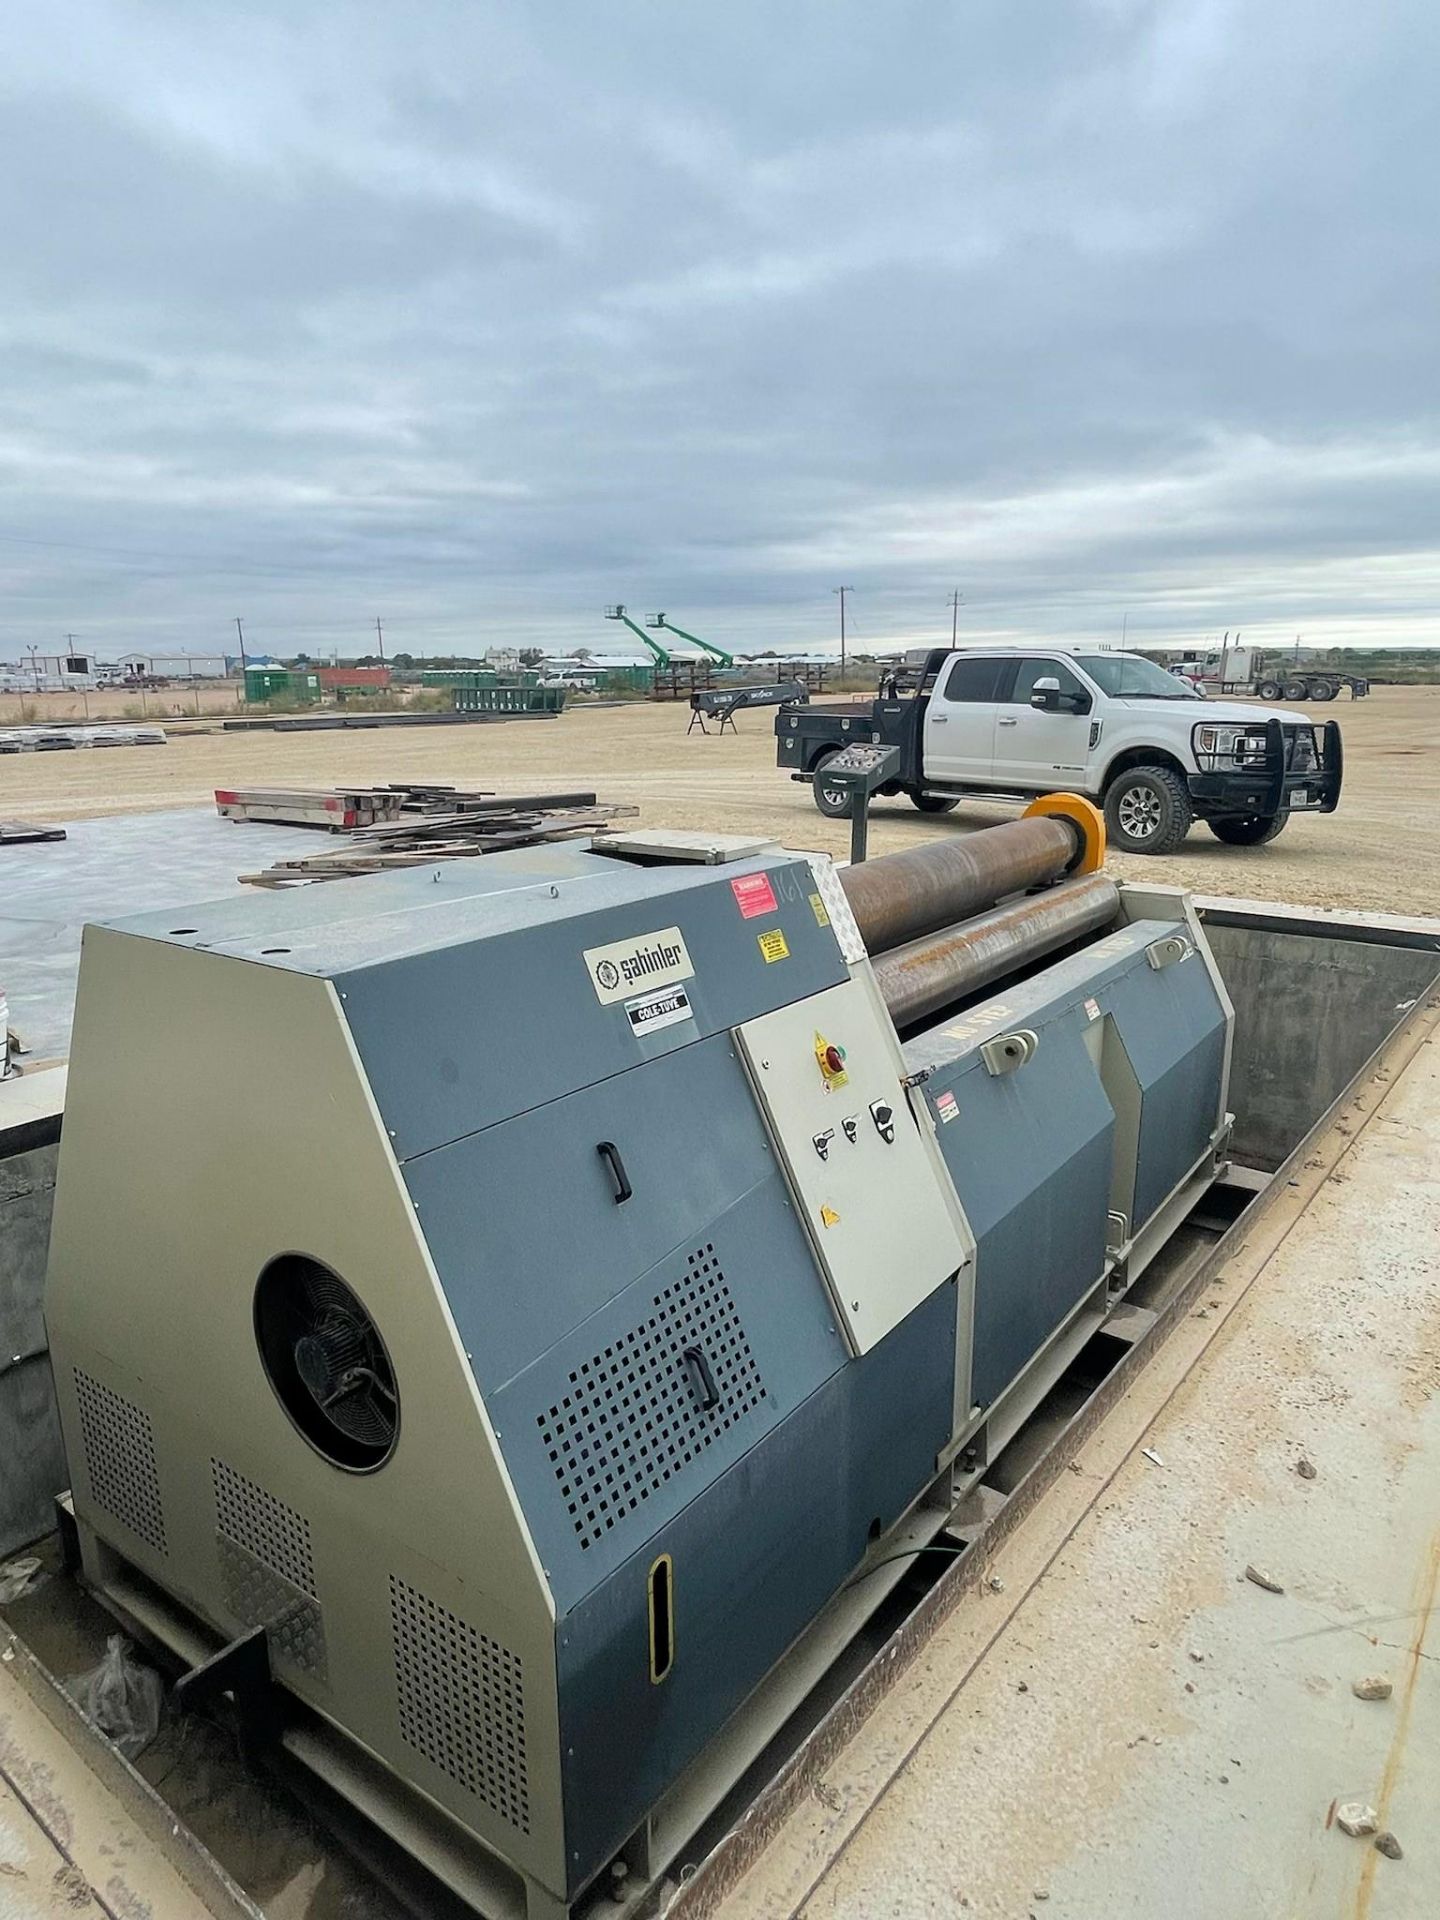 2014 Cole-Tuve 4RS-10-300 1" x 10' Plate Roll, 4 Roll (LOCATION: San Angelo, TX) - Image 4 of 8